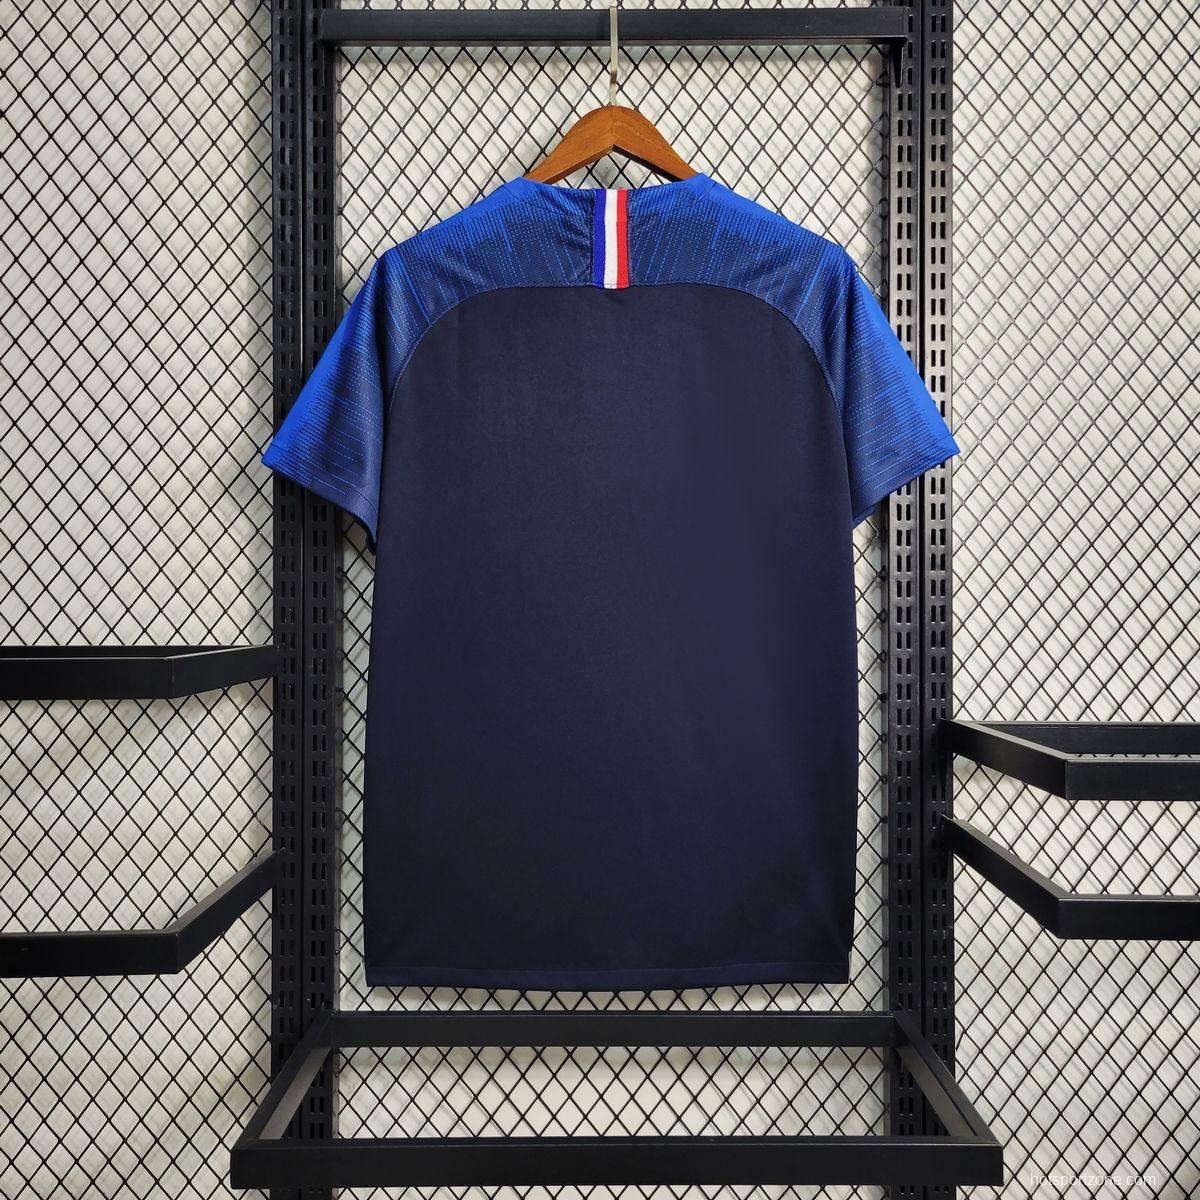 Retro 2018 France Home Jersey